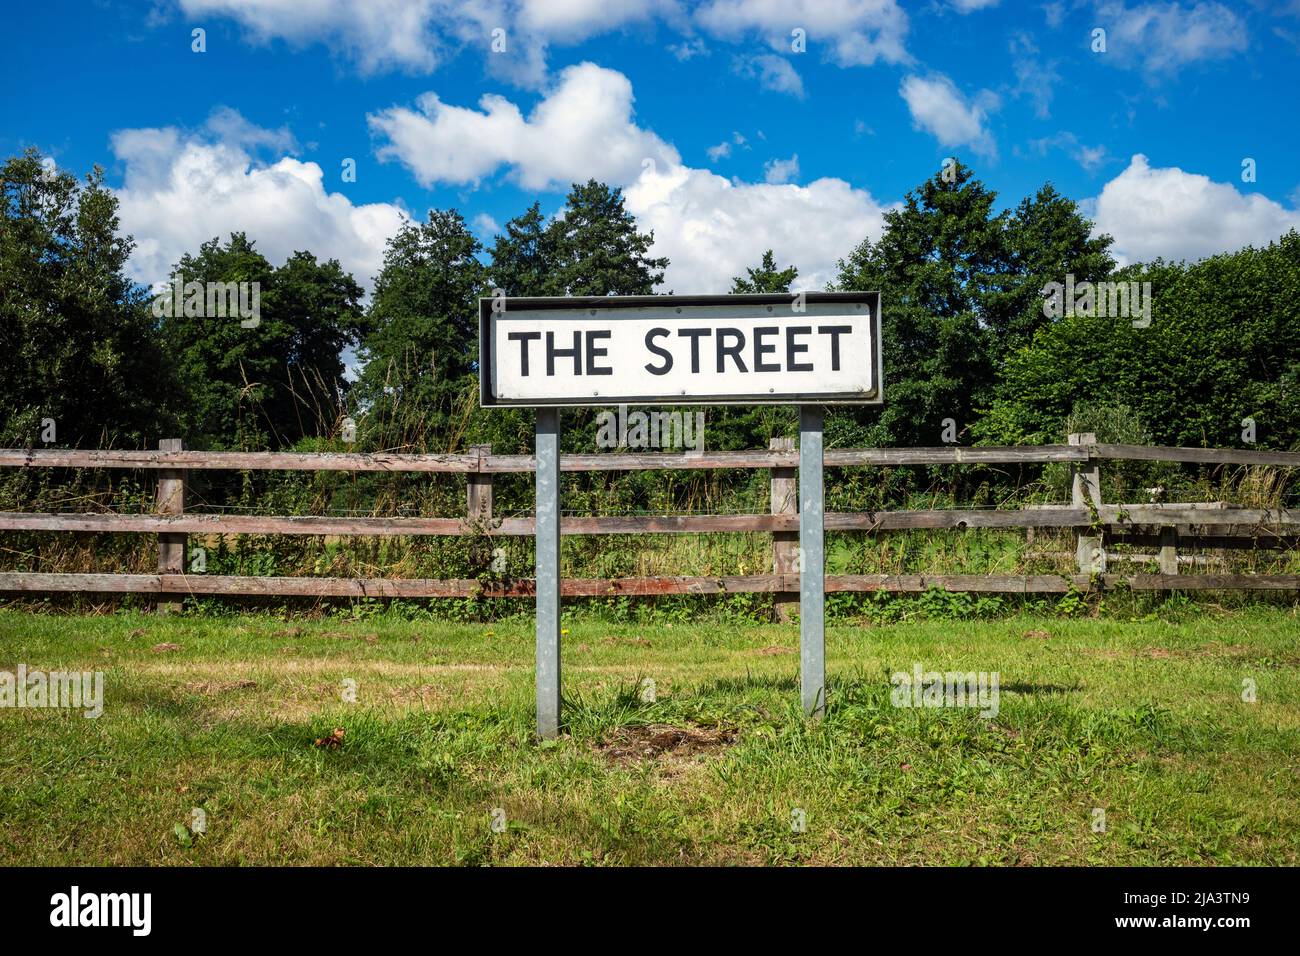 The Street road sign Stock Photo